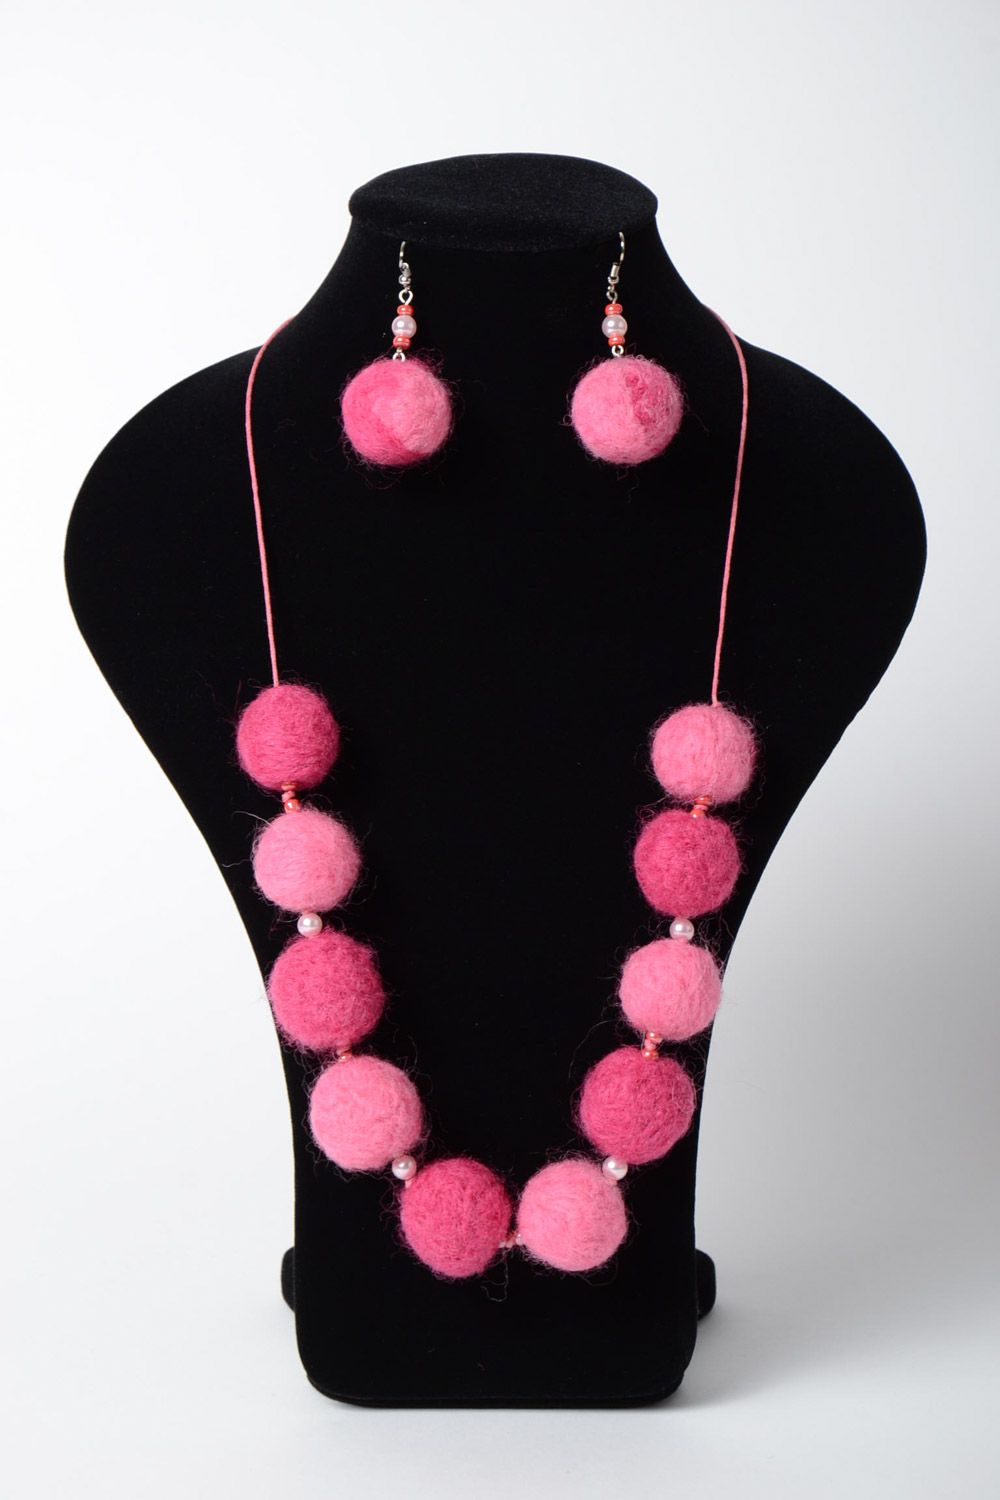 Handmade felted wool jewelry set 2 items pink ball necklace and earrings photo 5